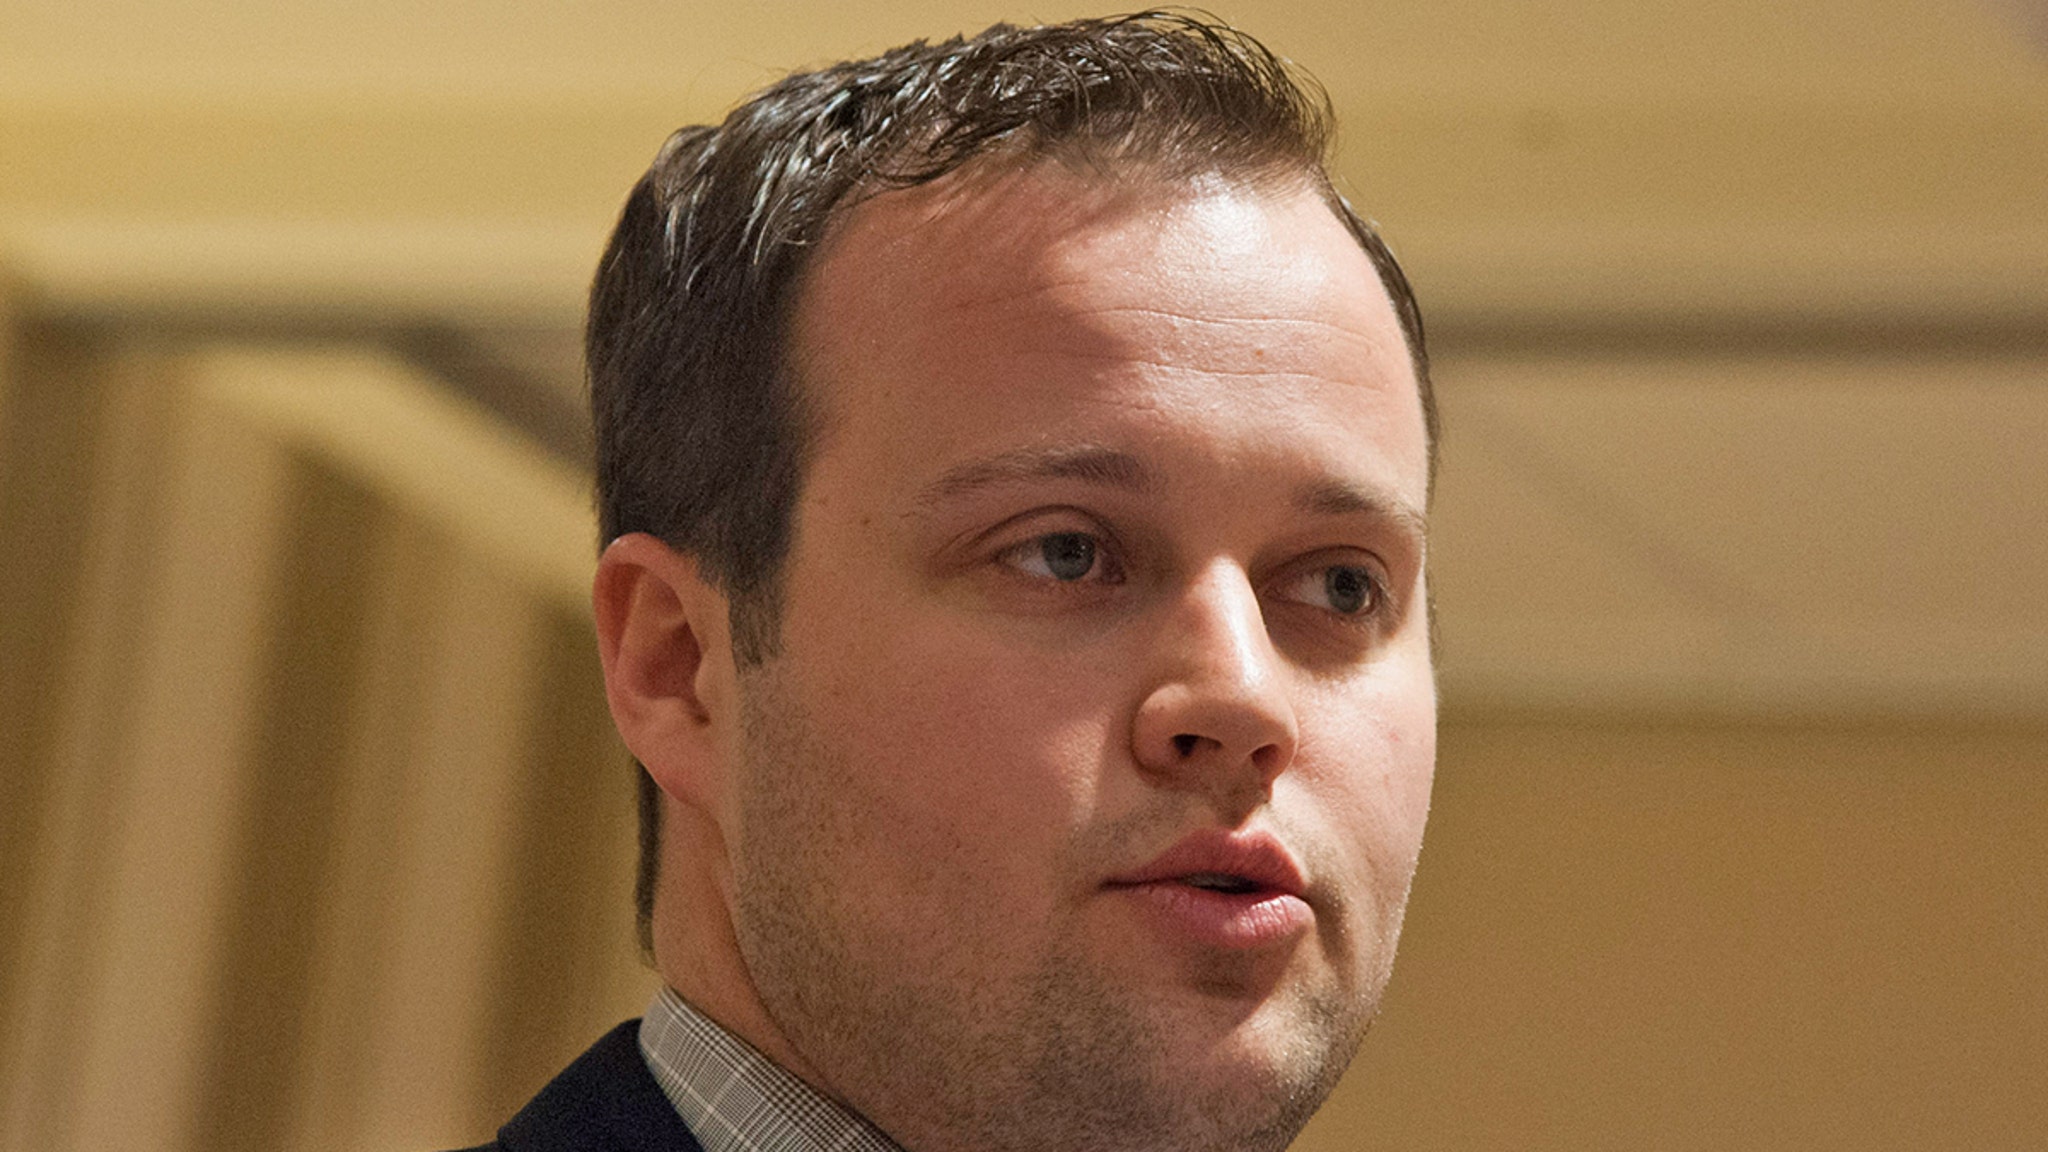 Josh Duggar's Child Porn Appeal Rejected by Supreme Court